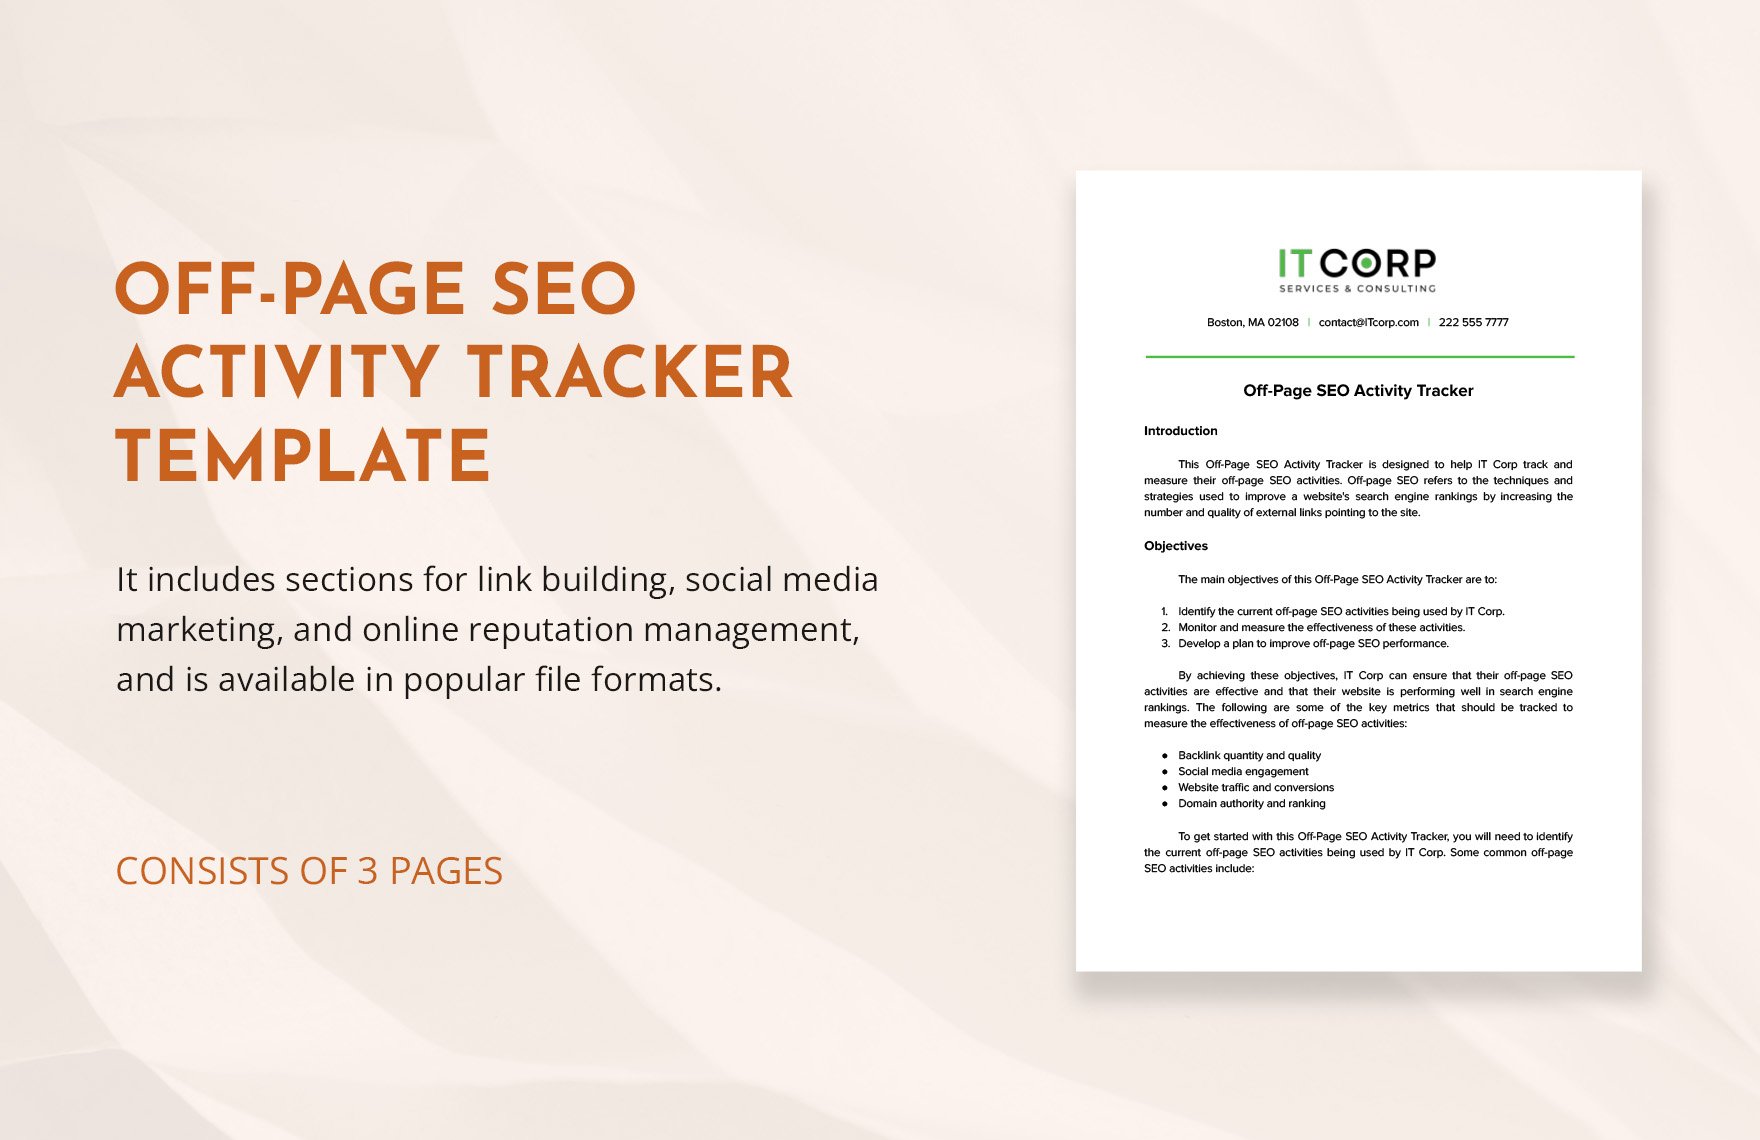 Off-page SEO Activity Tracker Template in Word, Google Docs, PDF